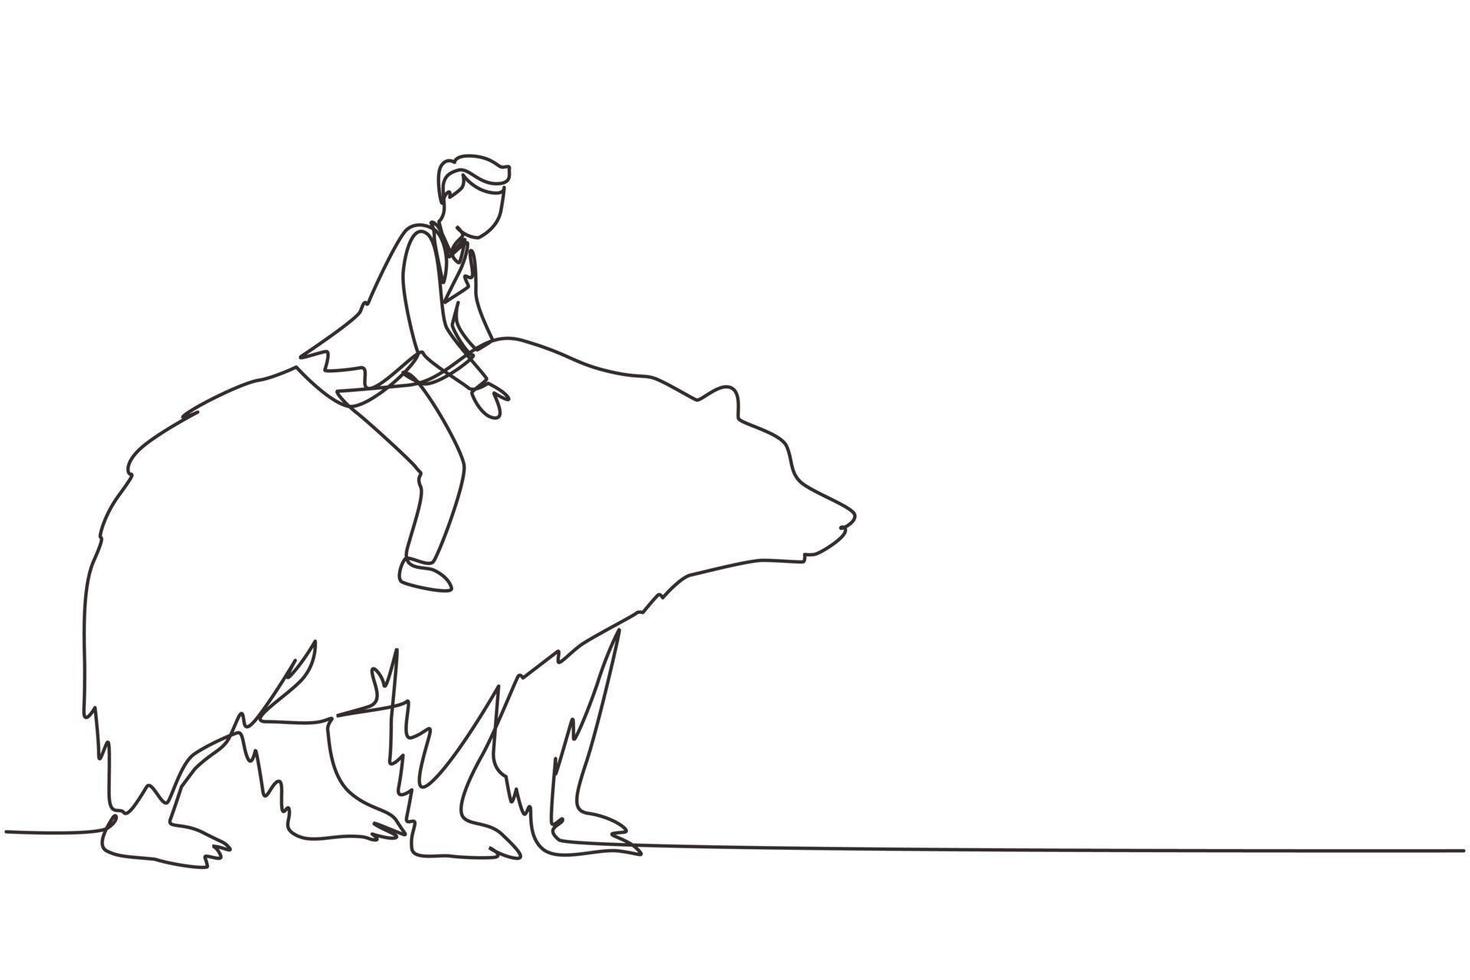 Continuous one line drawing businessman rides on bear in stock market trading concept. stock market analysis, business and investment, stock exchange. Single line design vector graphic illustration